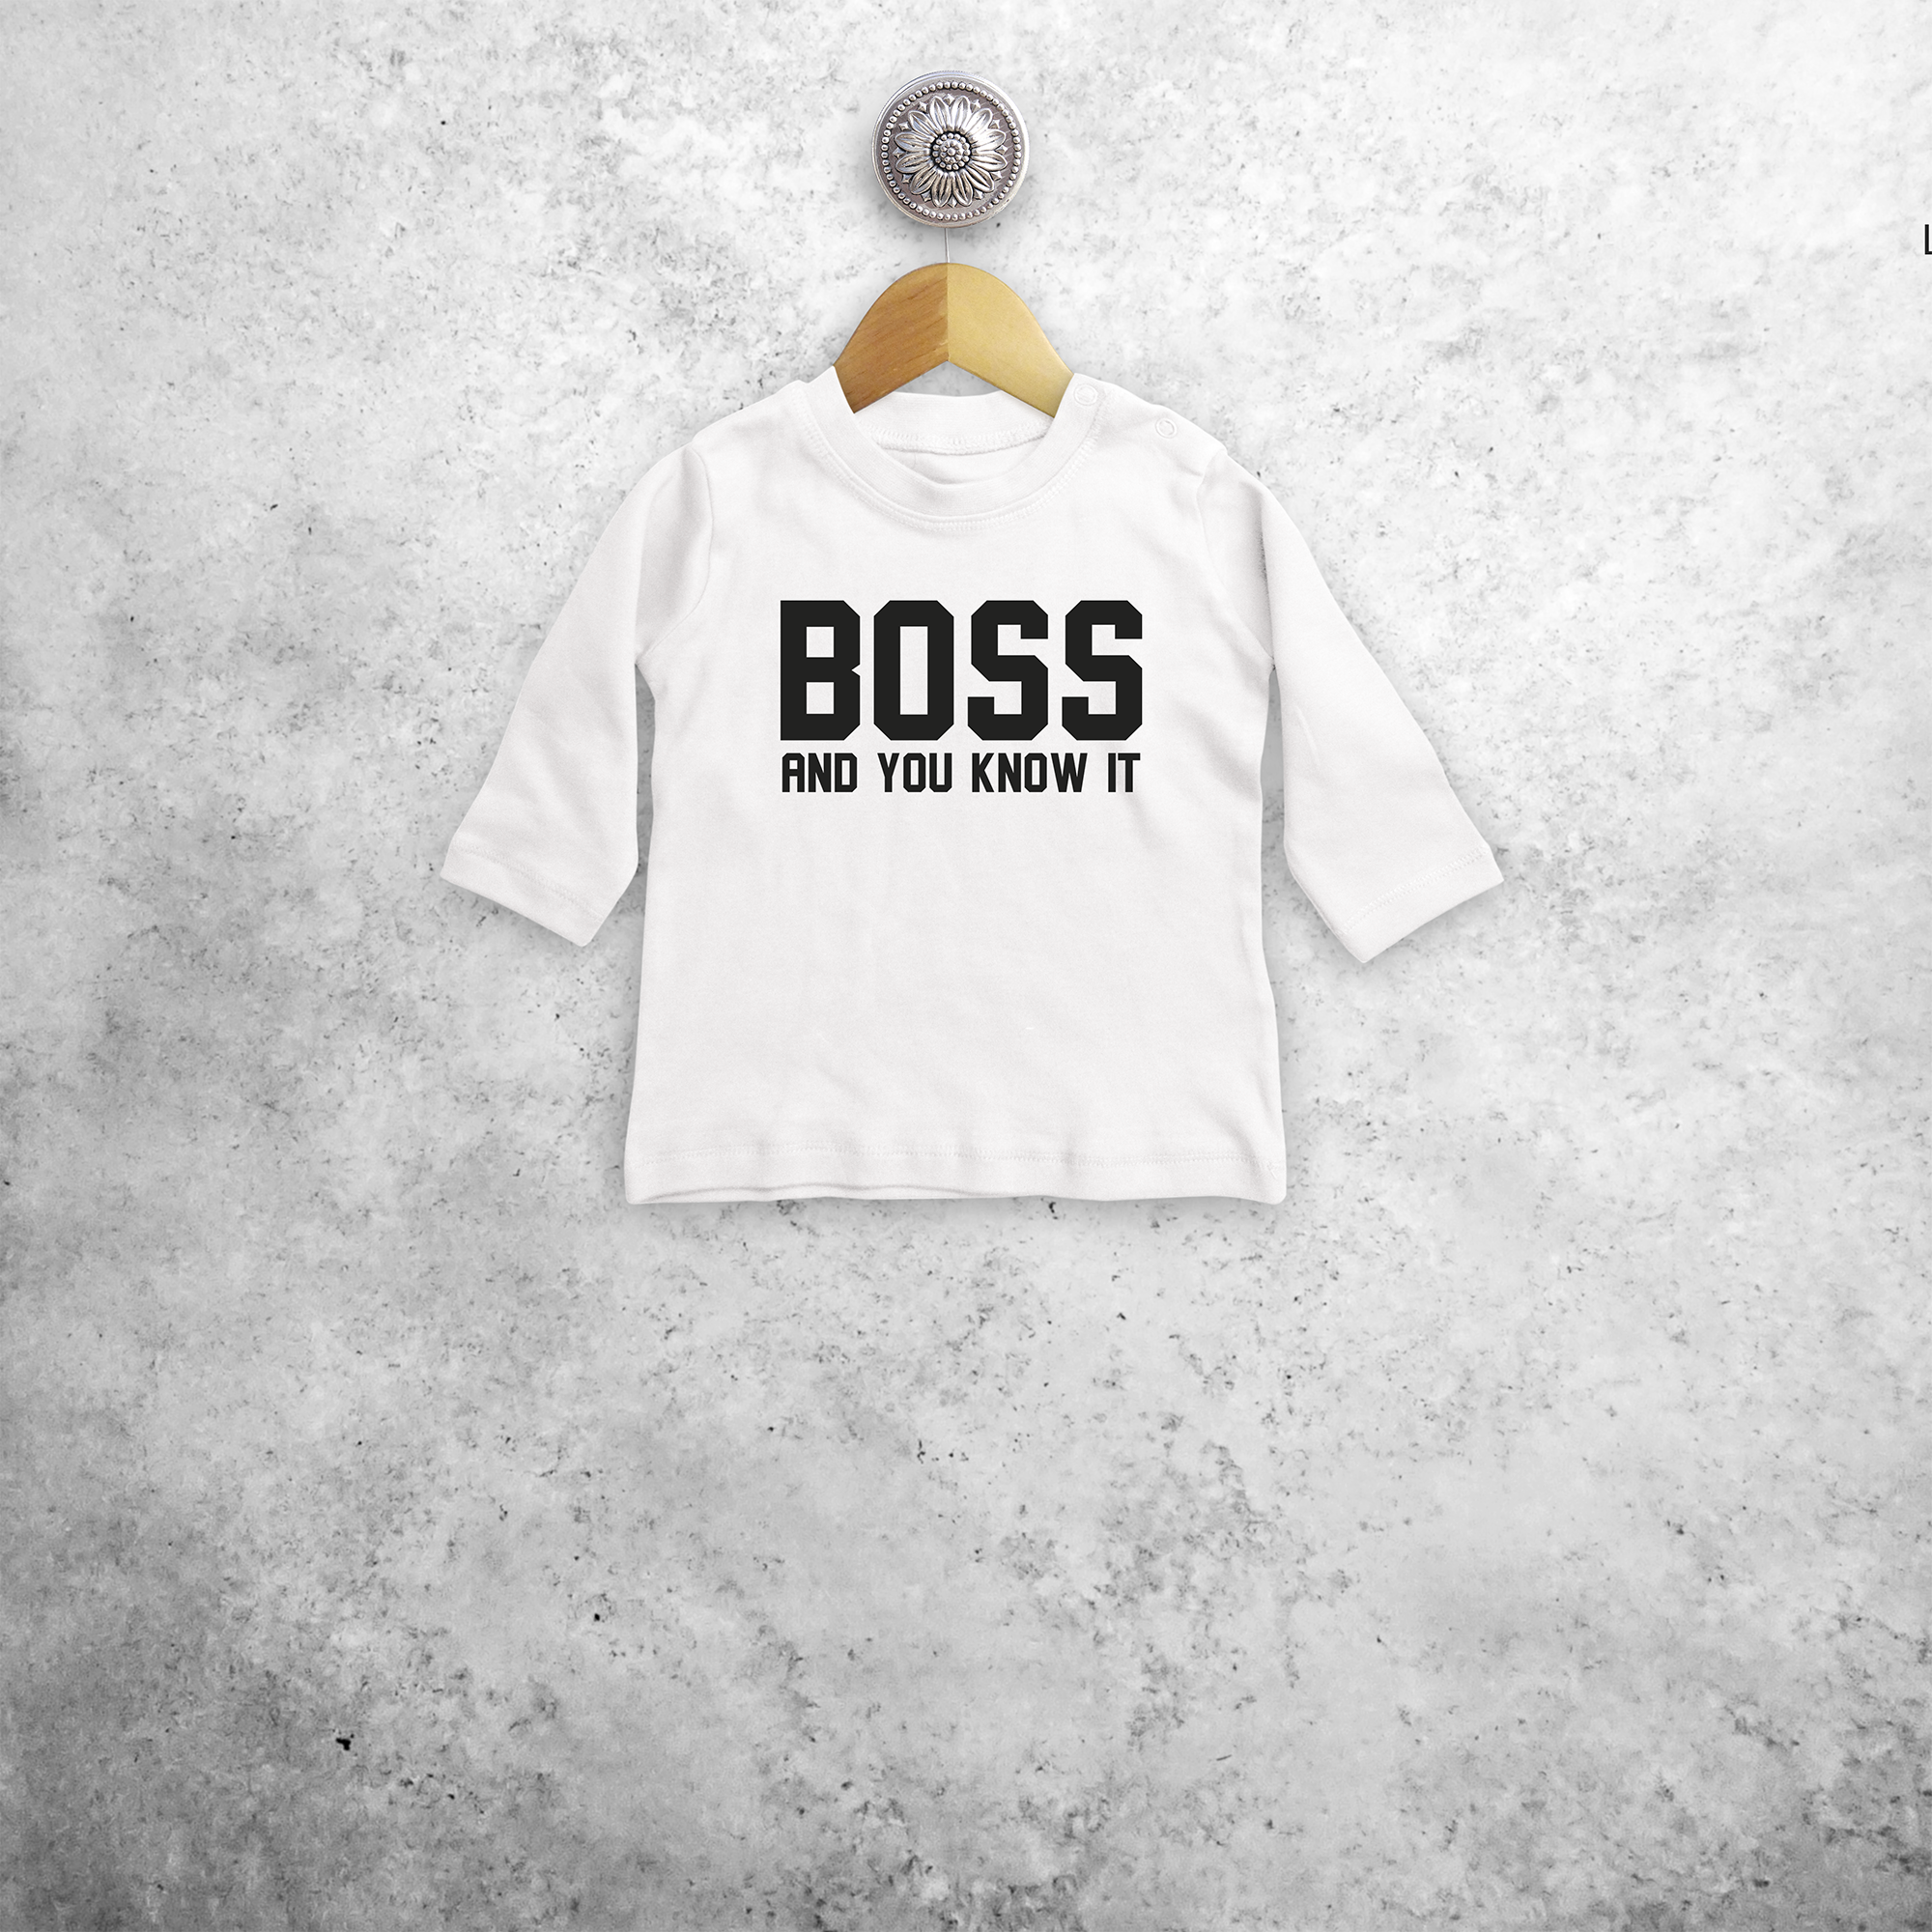 'Boss and you know it' baby shirt met lange mouwen